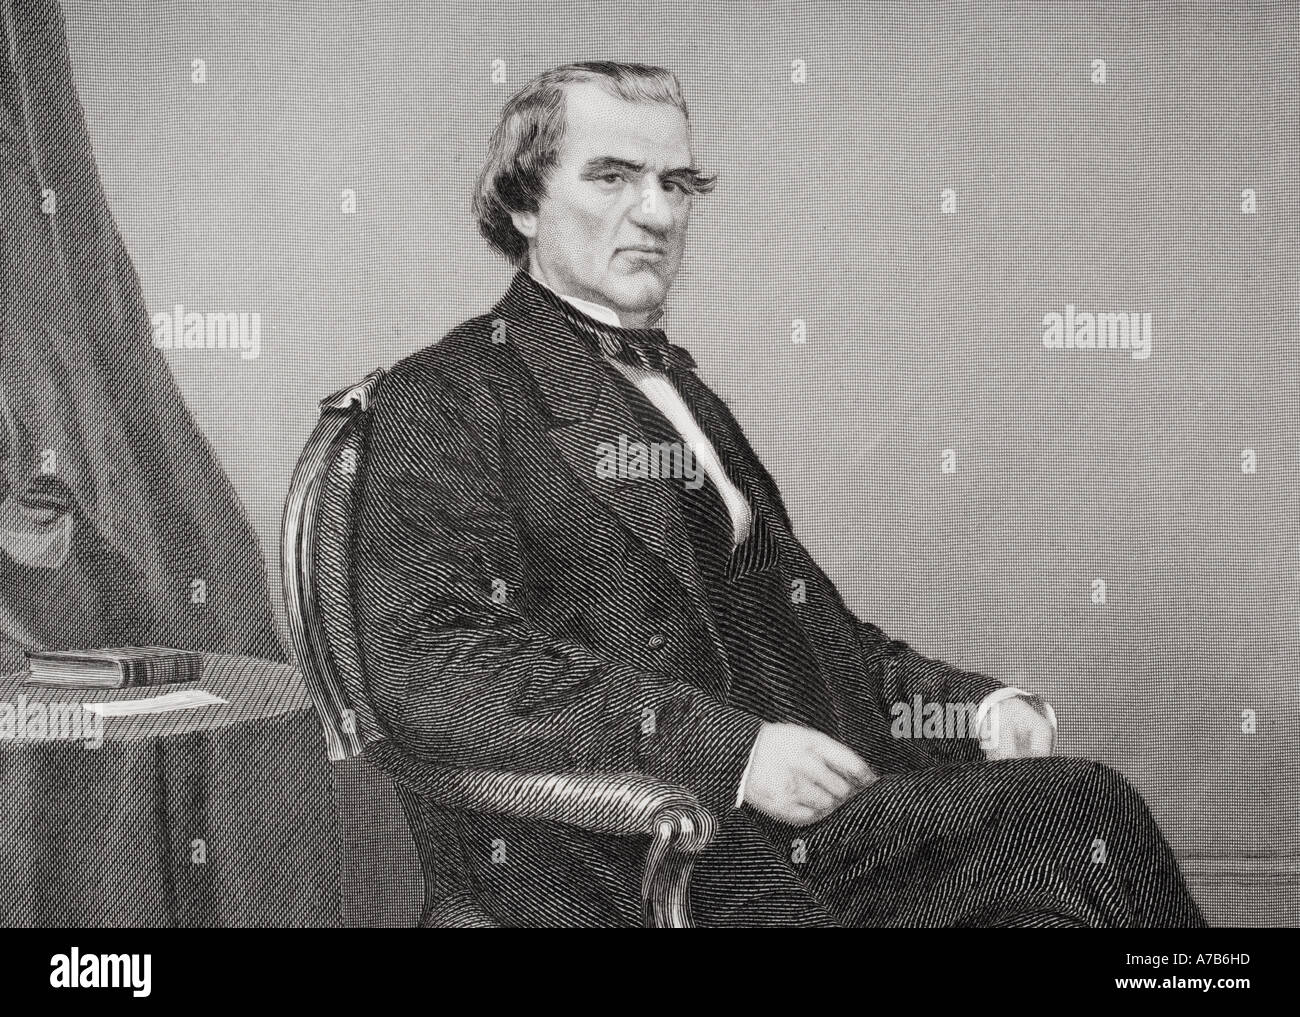 Andrew Johnson, 1808 - 1875. 17th president of the United States of America. Stock Photo